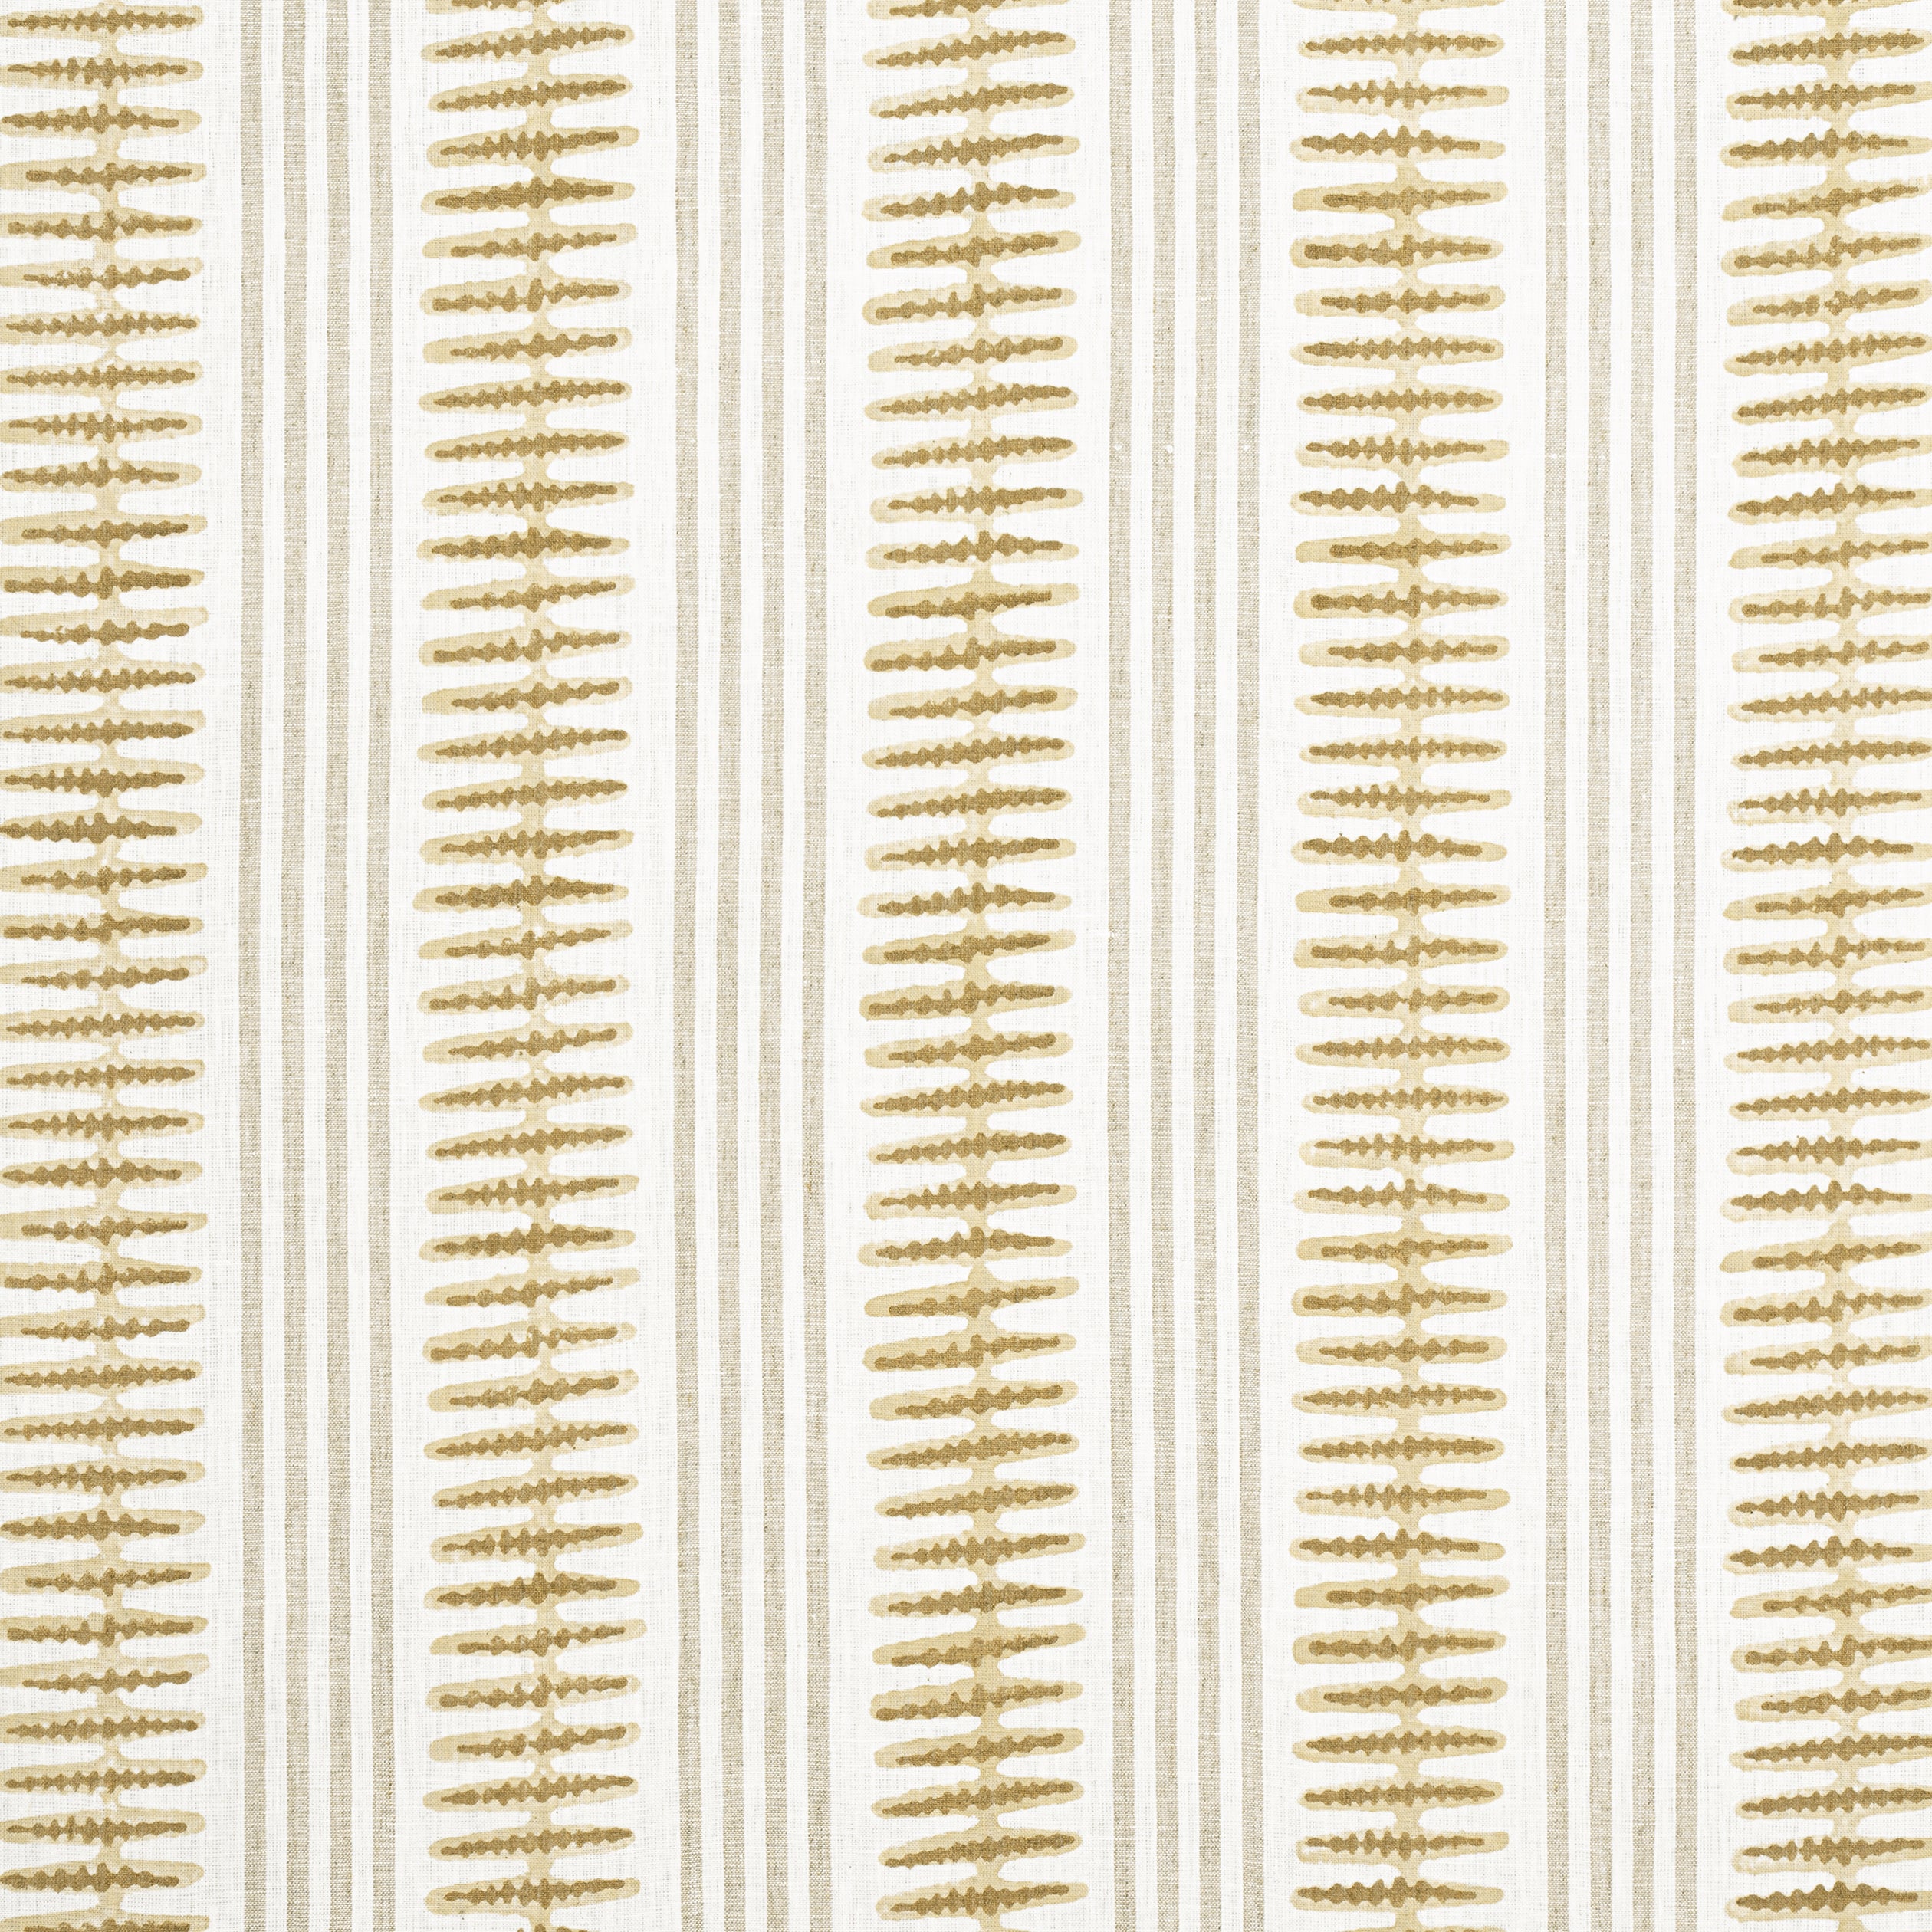 Indo Stripe fabric in camel color - pattern number F981316 - by Thibaut in the Montecito collection